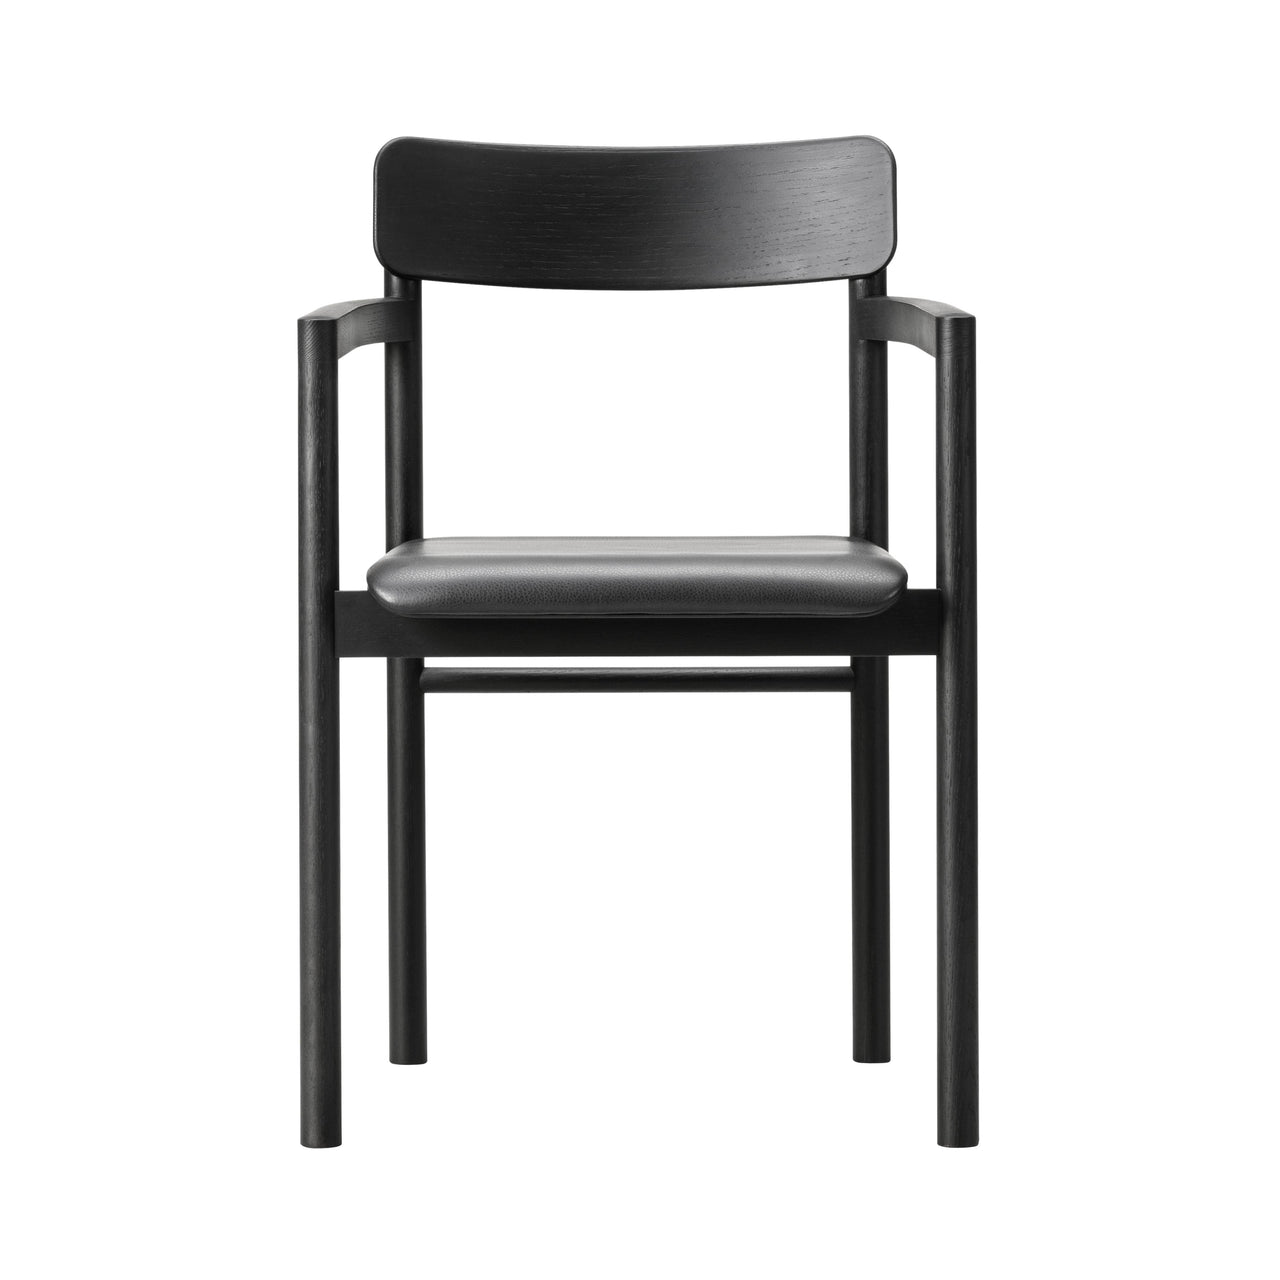 Post Chair: Seat Upholstered + Black Lacquered Oak